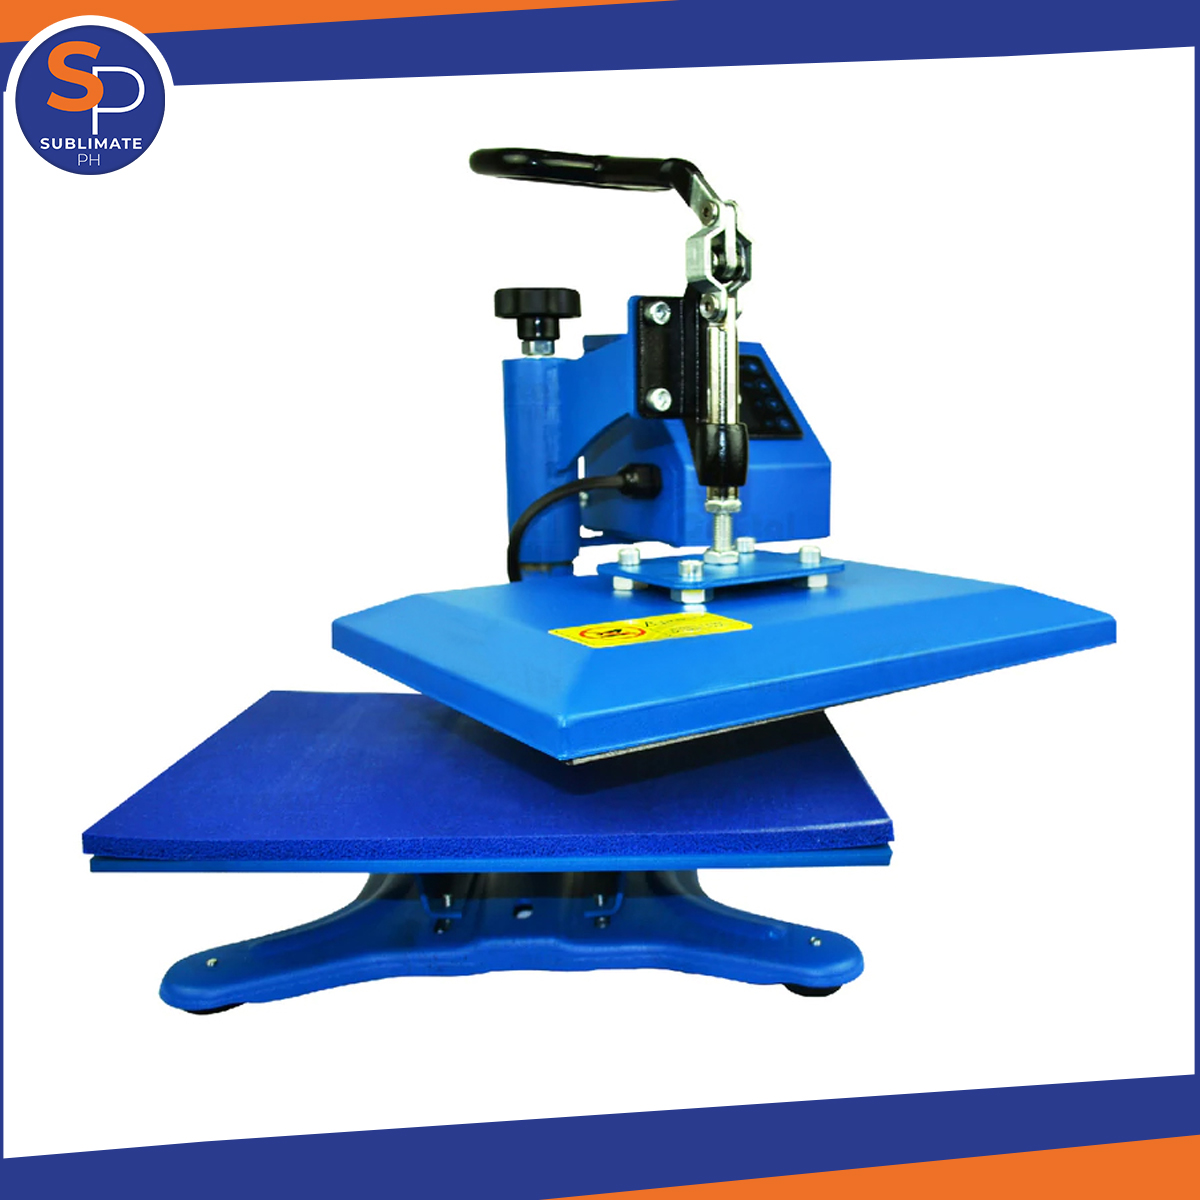 Sapphire Heatpress 15 x 15, Everything Else, Others on Carousell